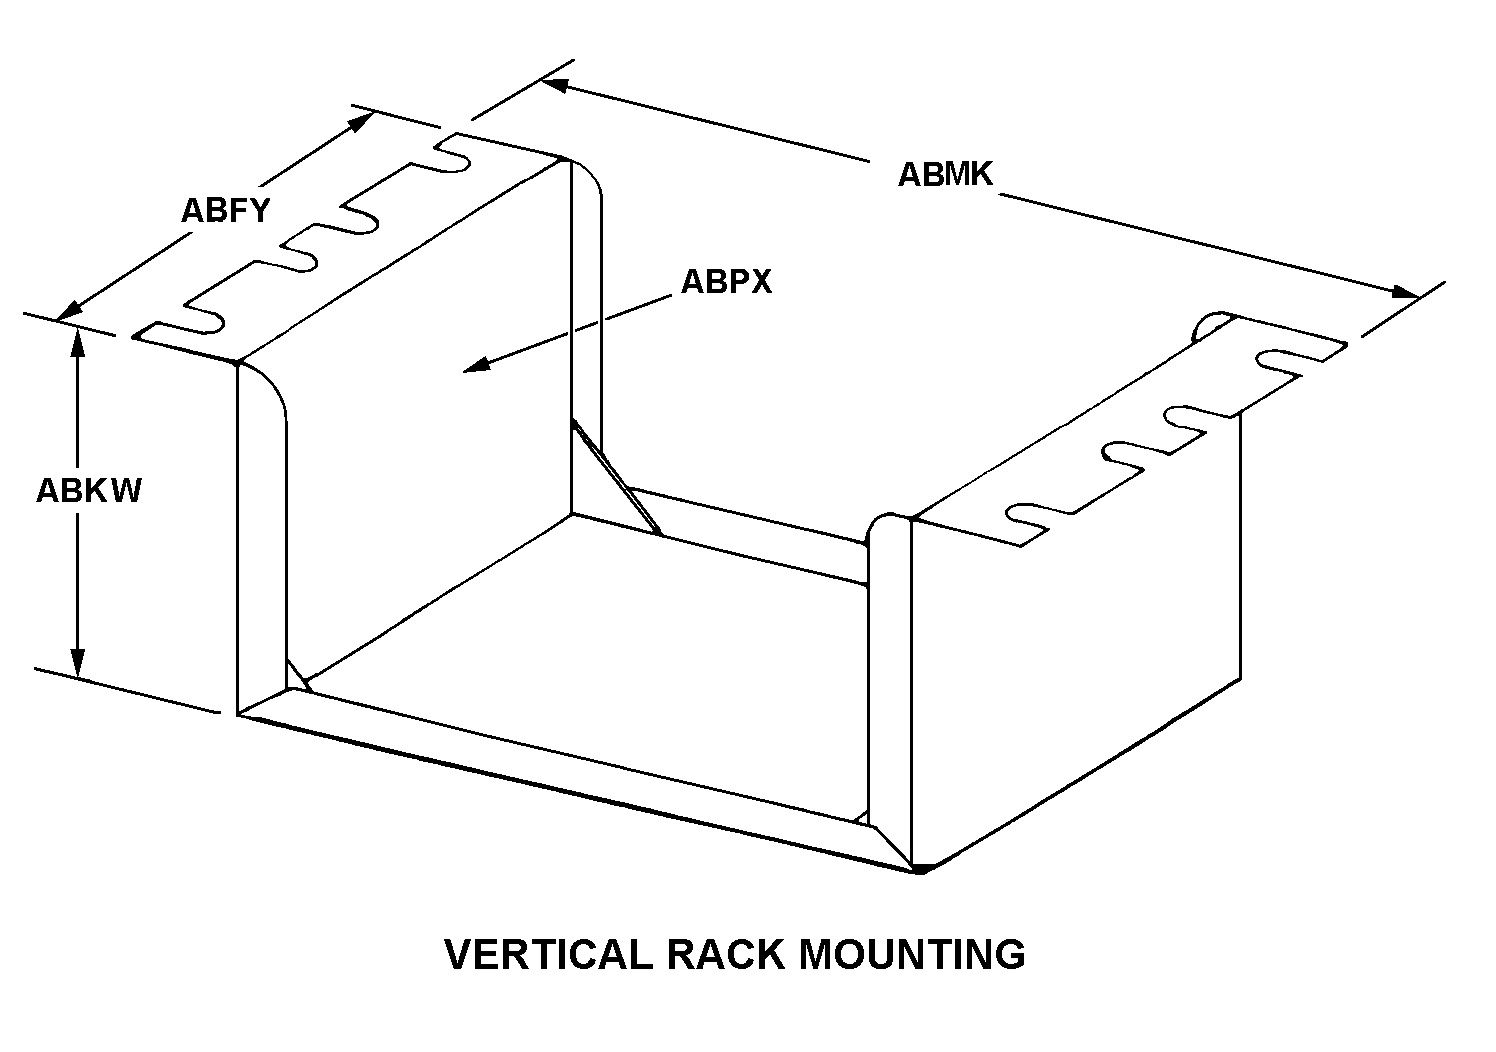 VERTICAL RACK MOUNTING style nsn 5975-01-098-6047